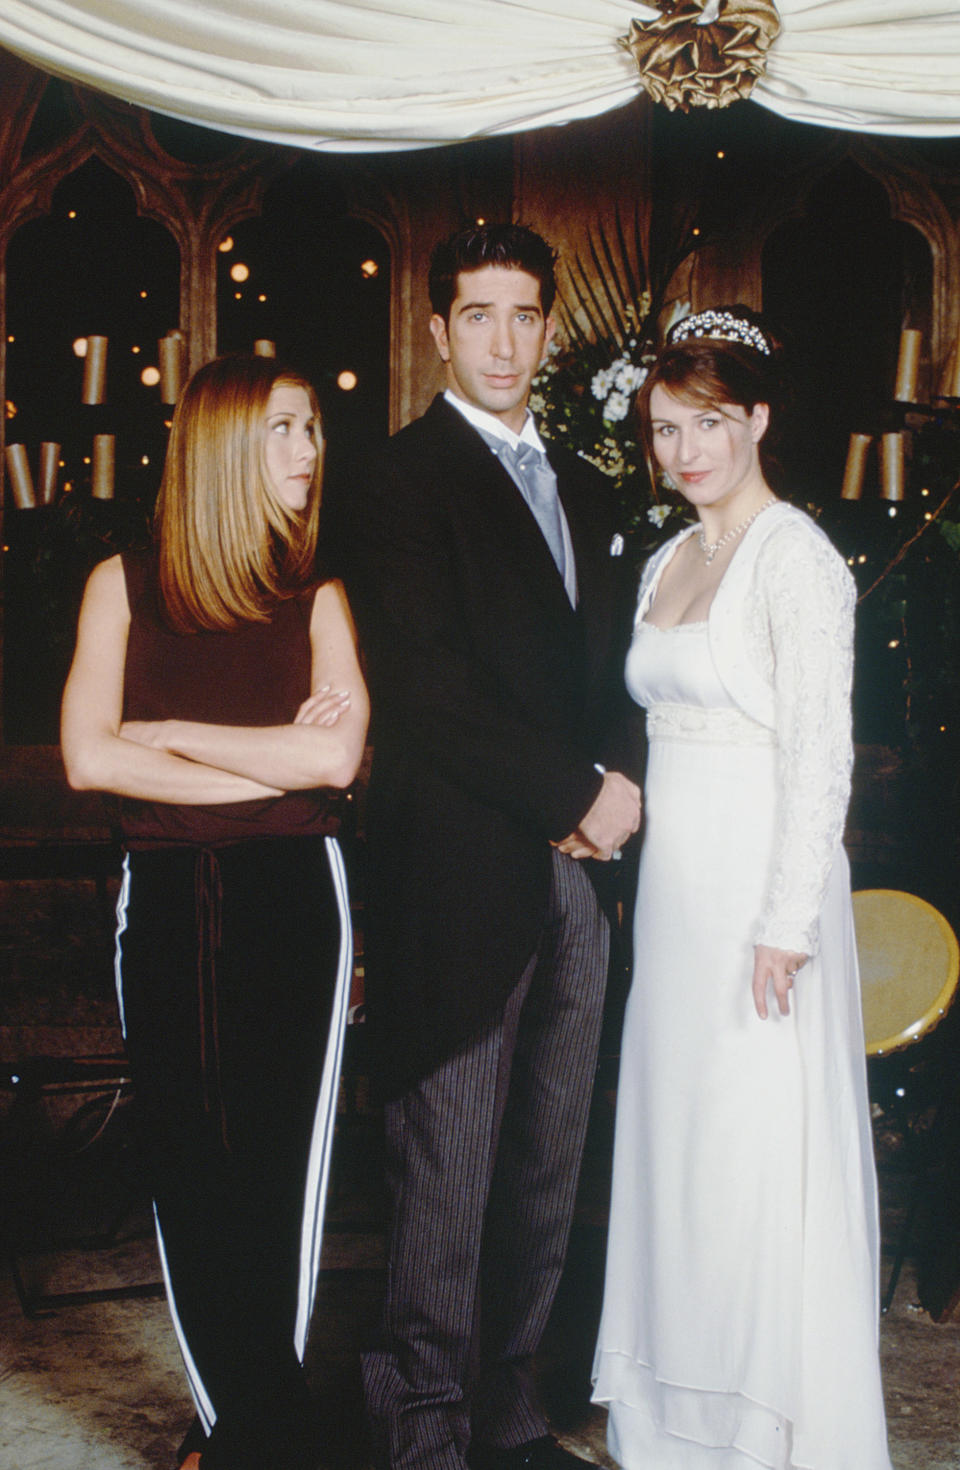 "The One with Ross's Wedding" (season 4, episodes 23 and 24)